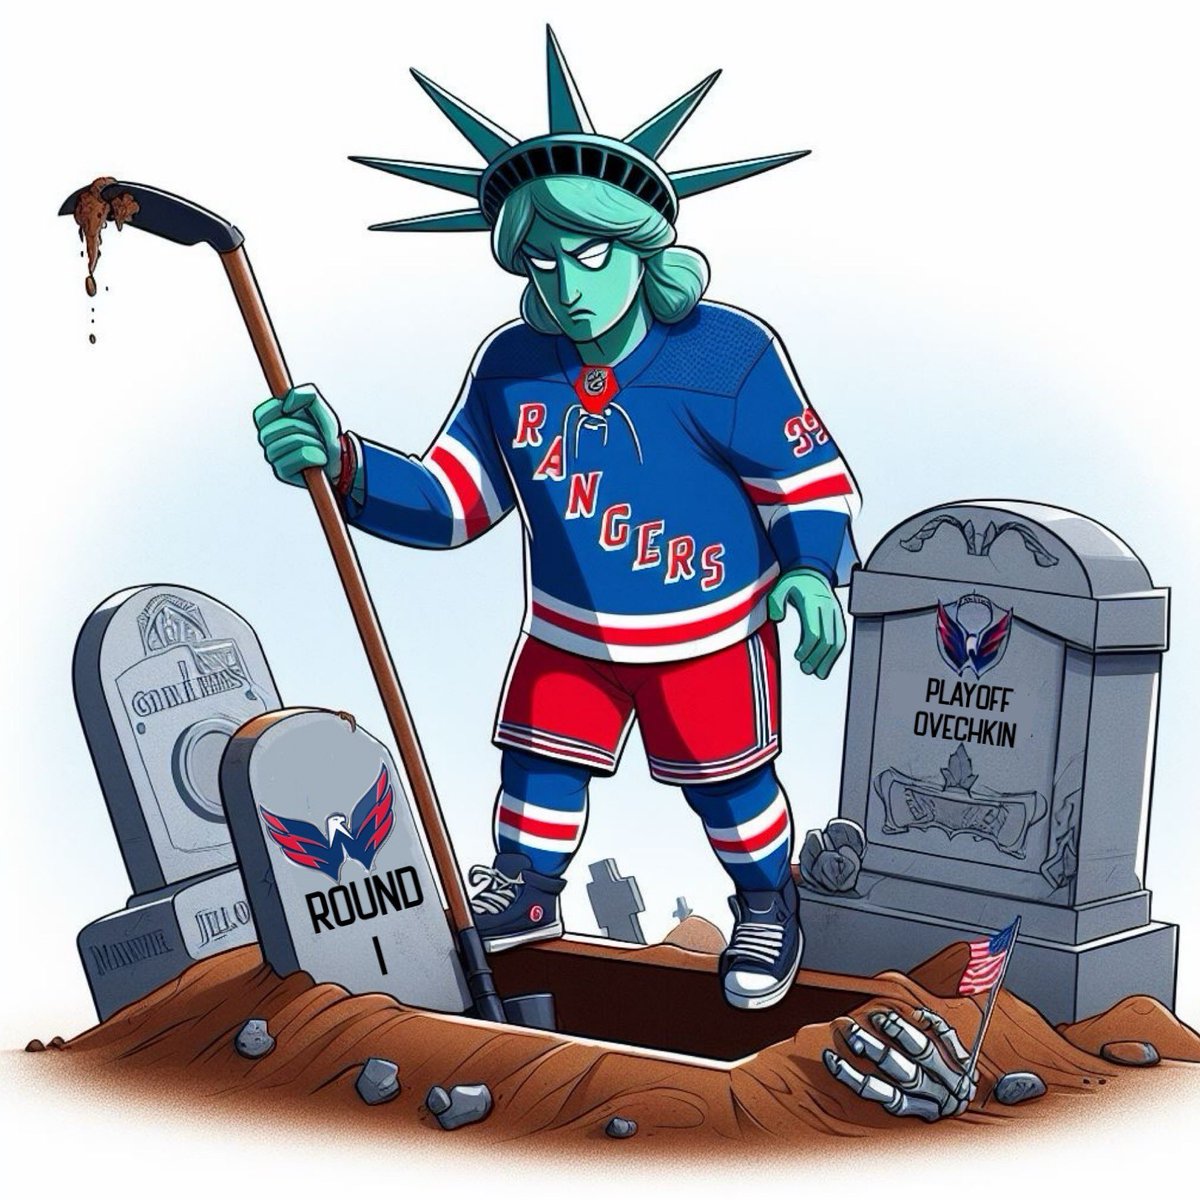 Sweep dreams, #allcaps 🧹🧹🧹🧹 #NYR punch their ticket to the next round 🔵⚪️🔴⚪️🔵